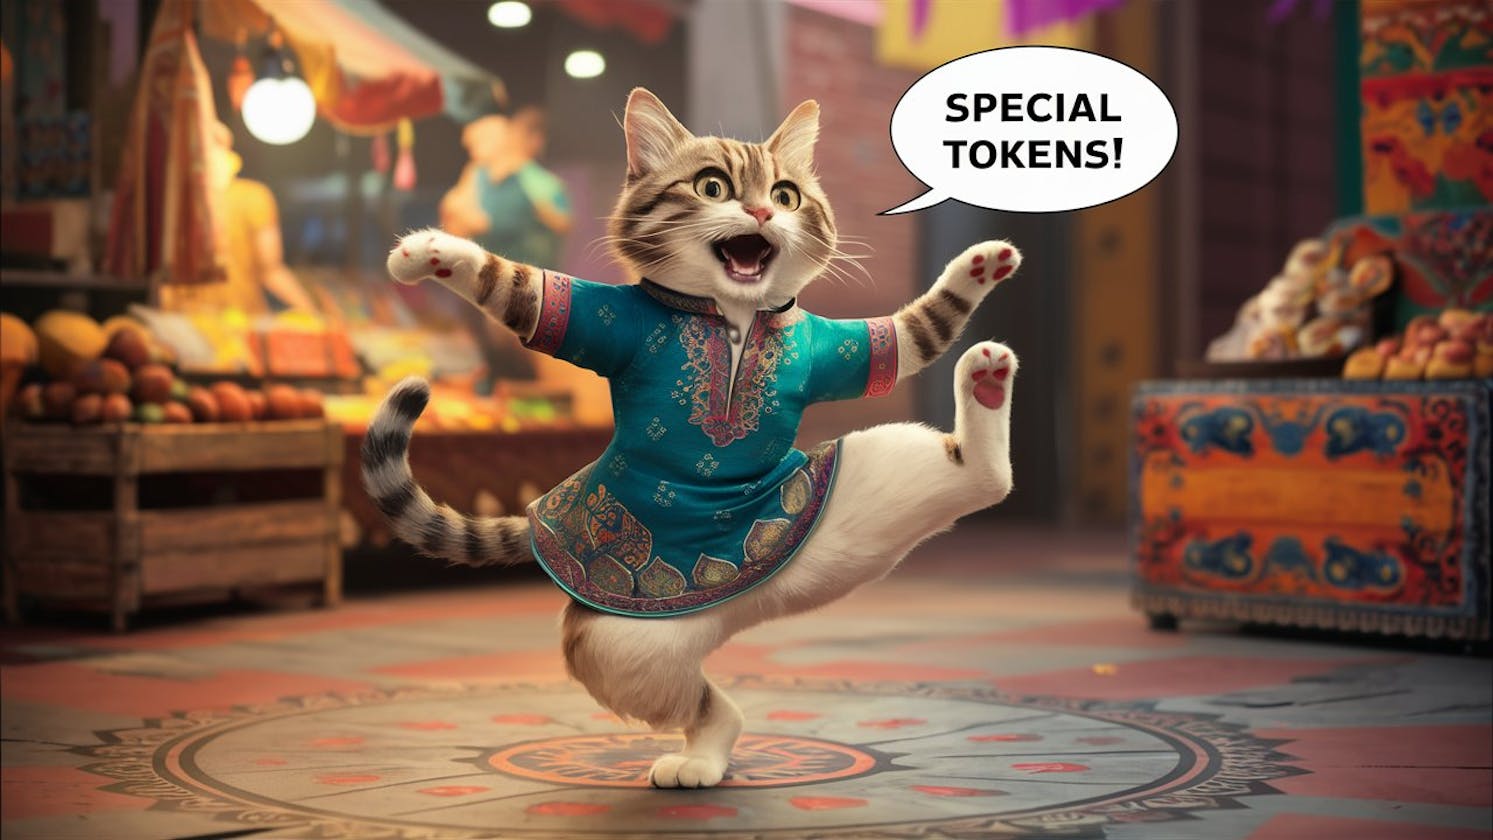 What are special tokens in Tokenization?